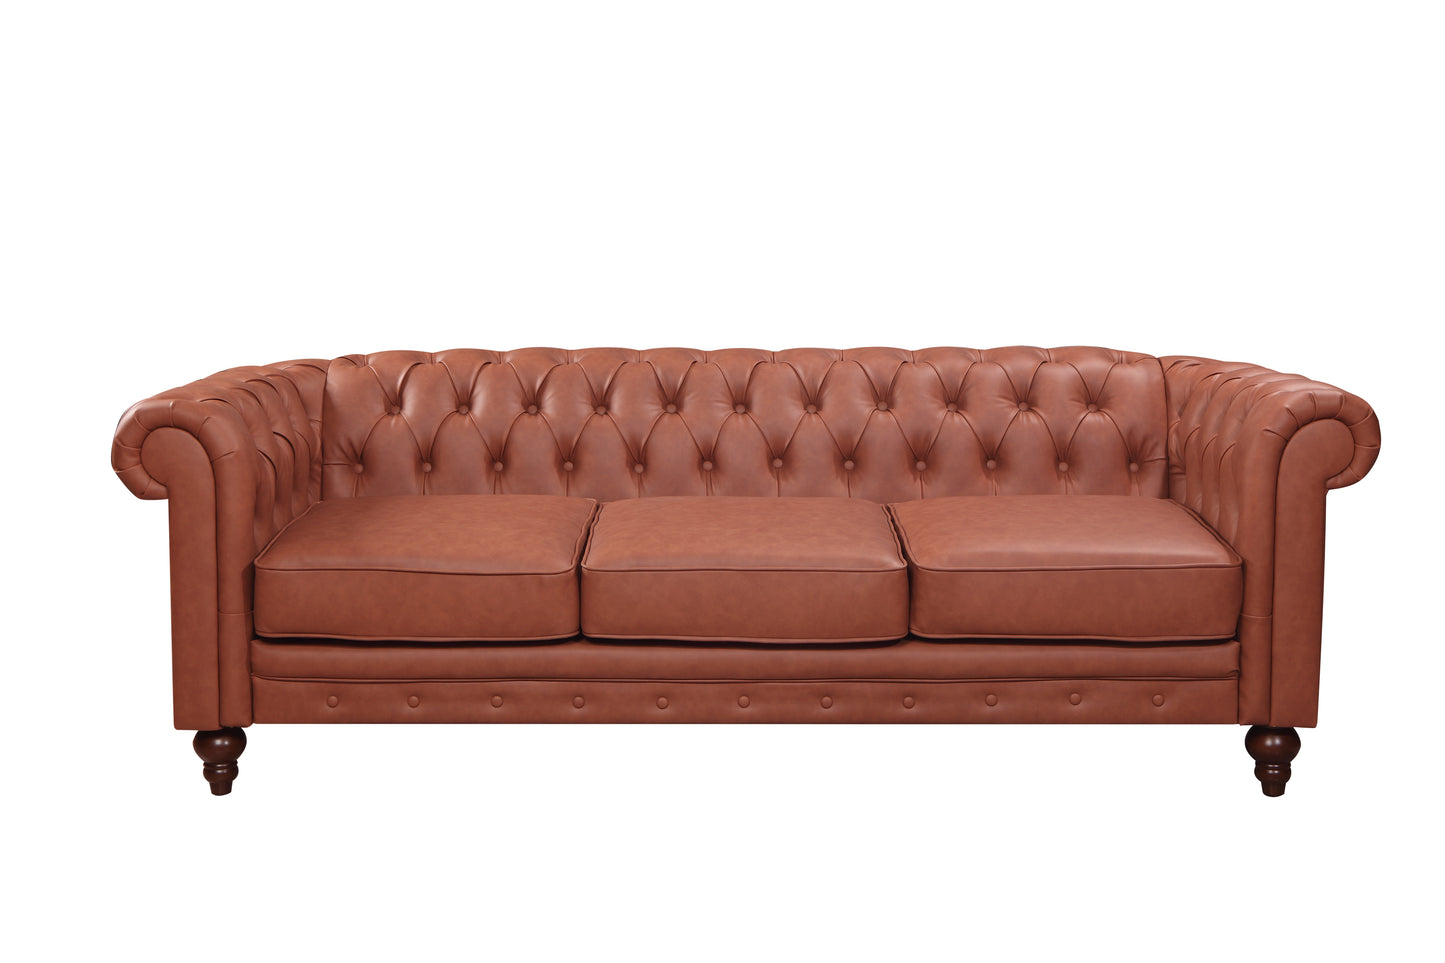 Mabel 3 Seater Sofa Lounge Chesterfield Style Button Tufted in Faux Leather - Brown